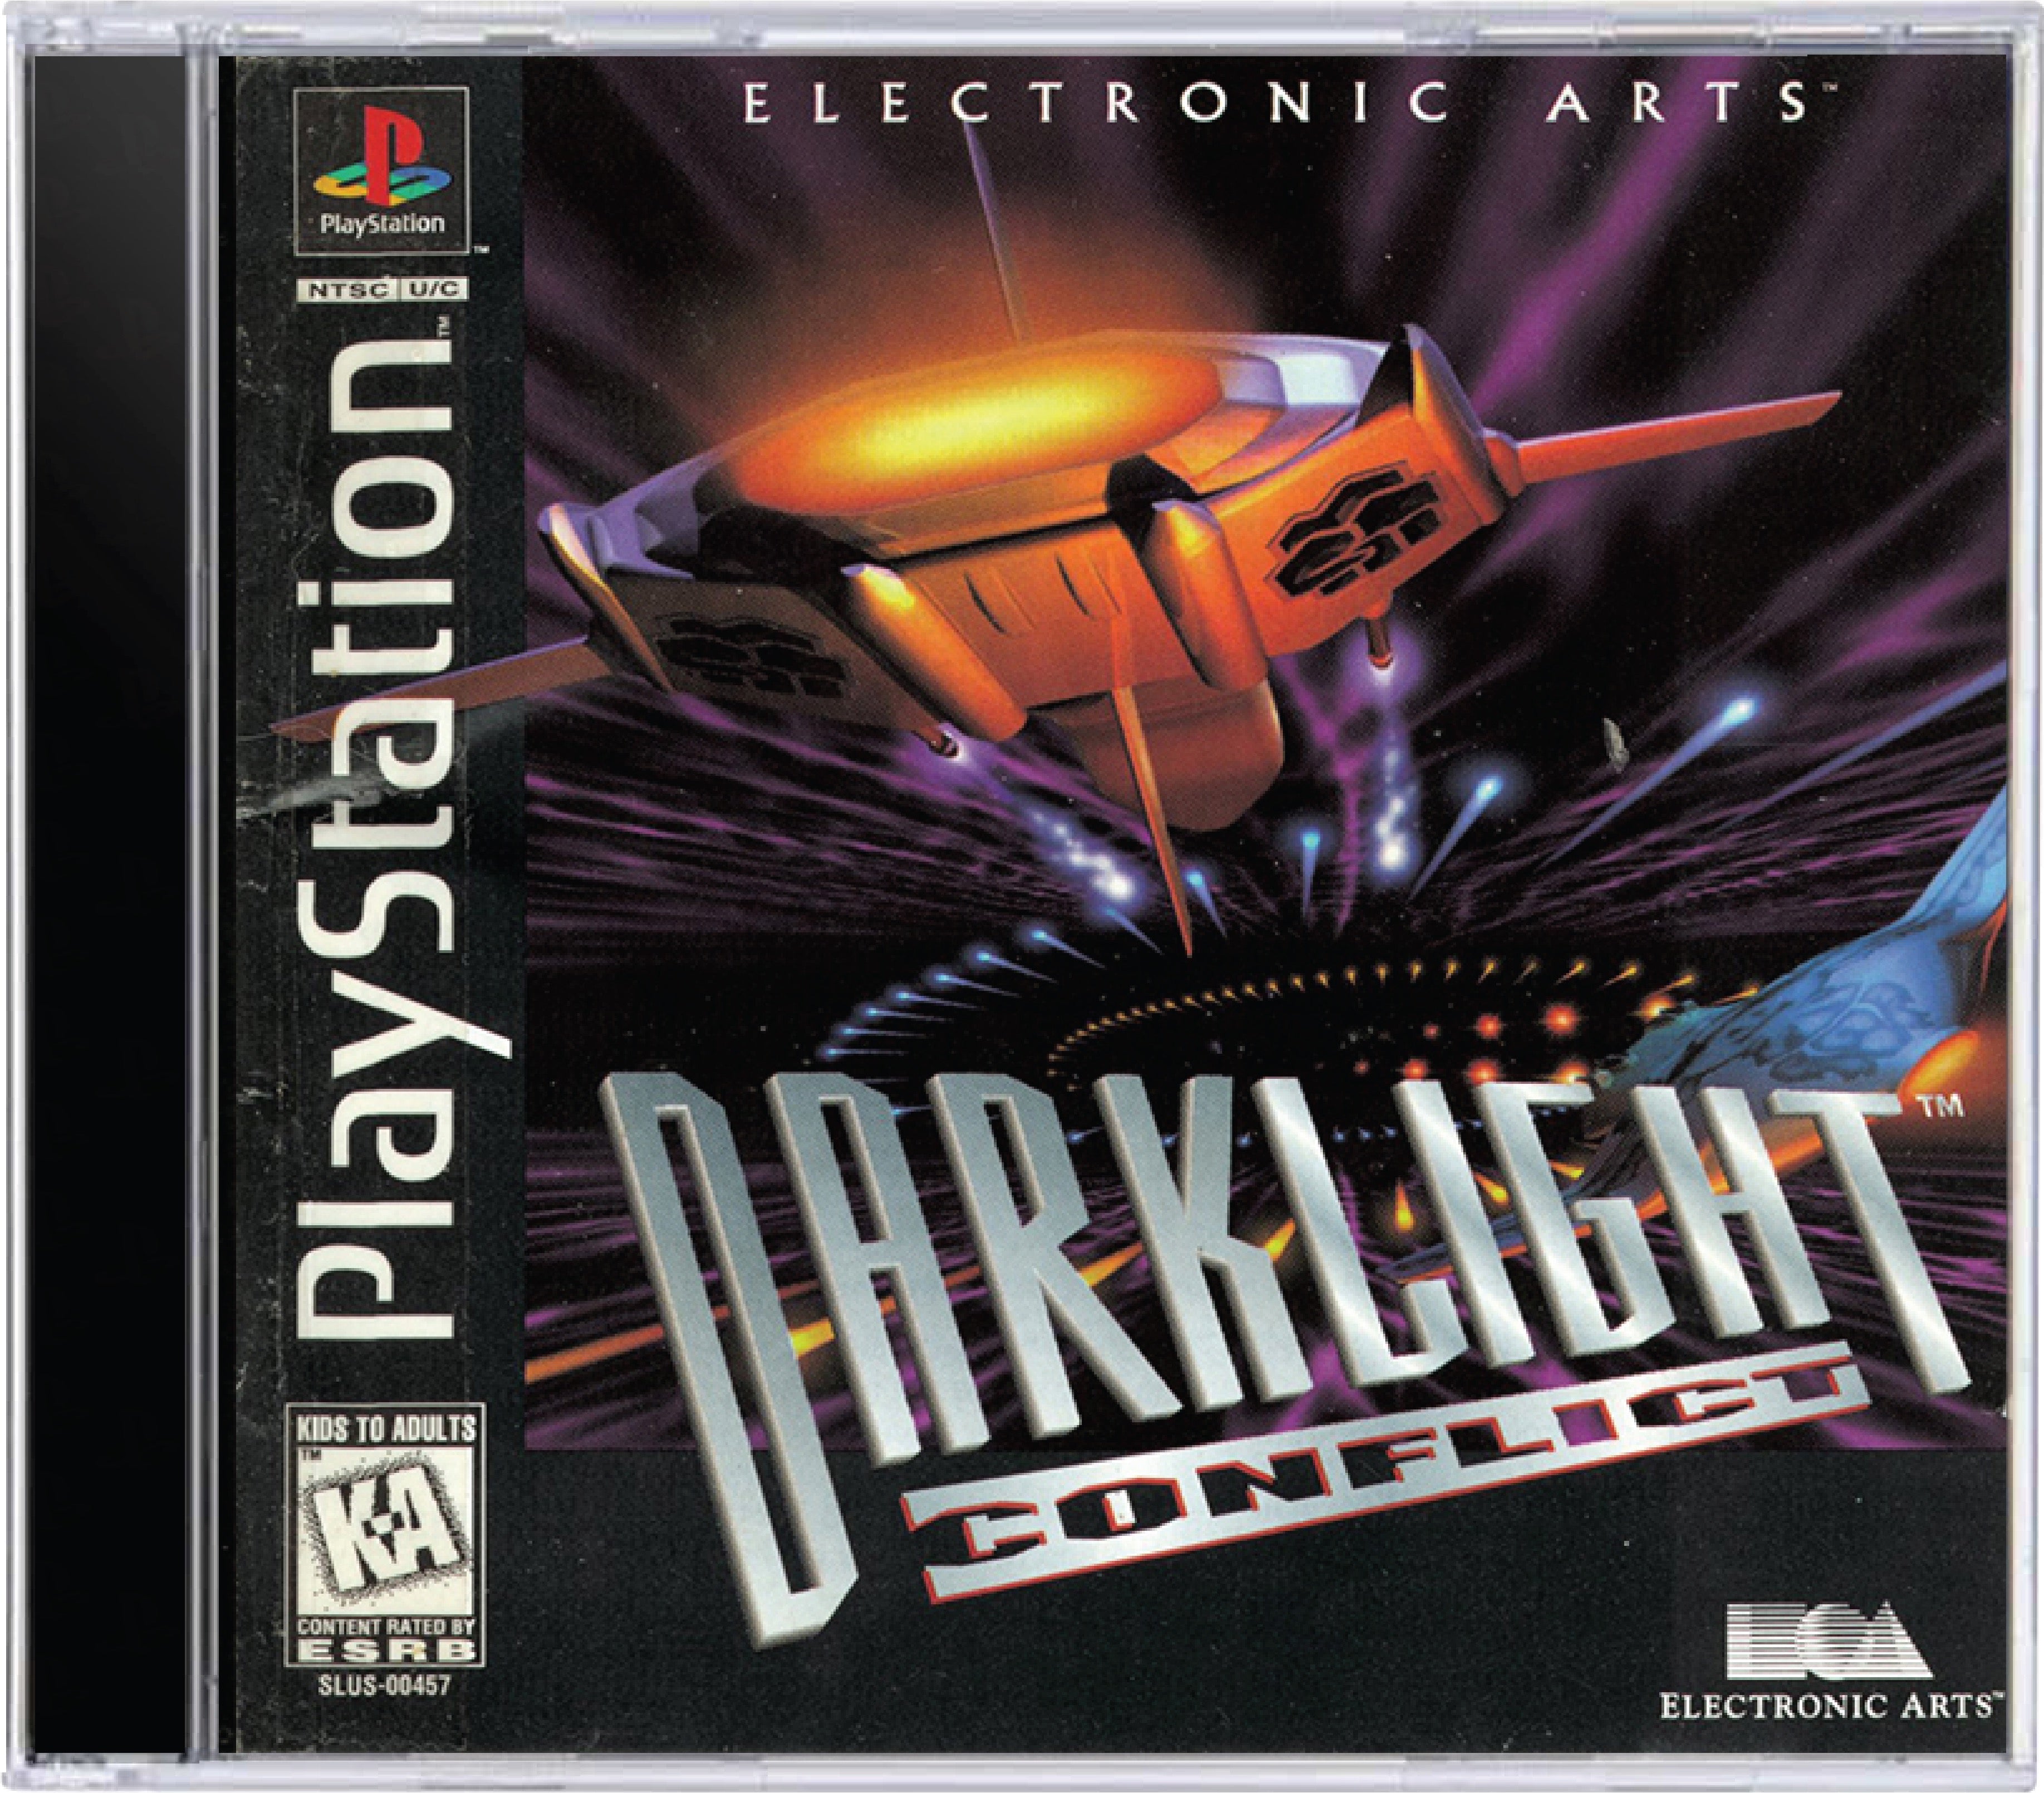 Darklight Conflict Cover Art and Product Photo